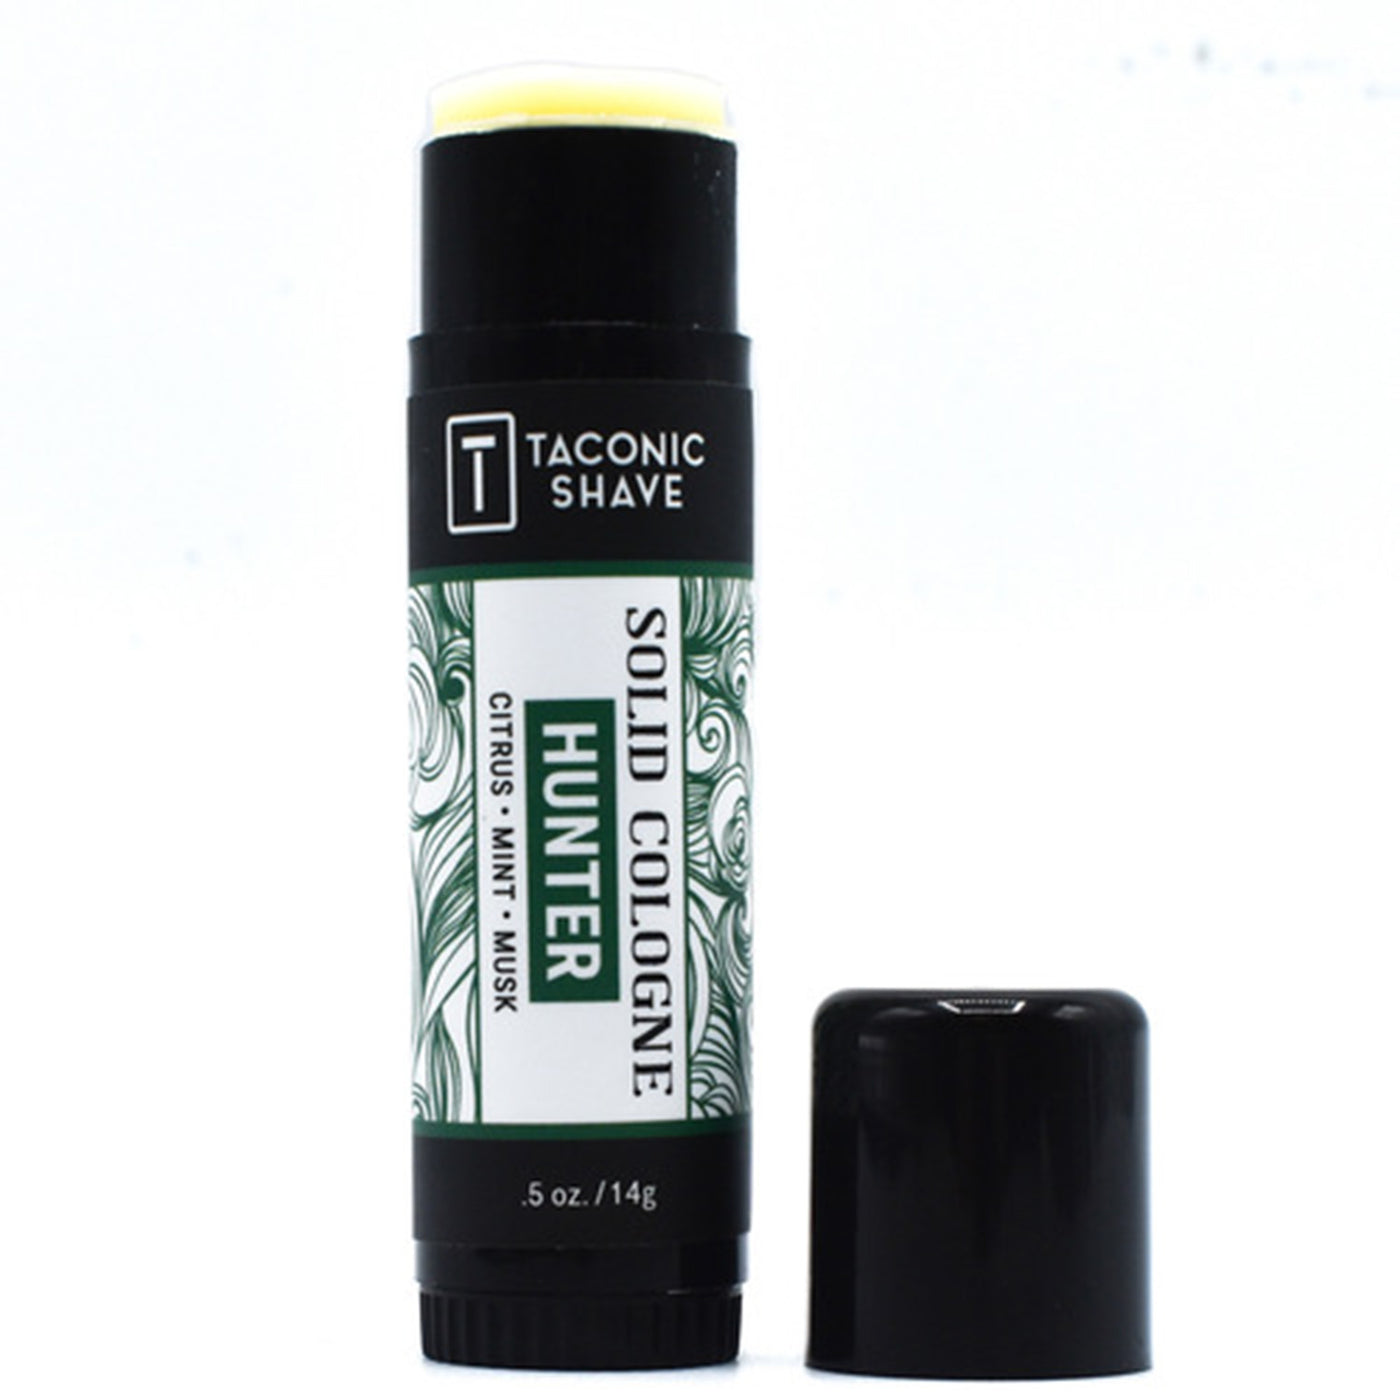  Taconic Shave Hunter Solid Cologne by Taconic Shave sold by Naked Armor Razors